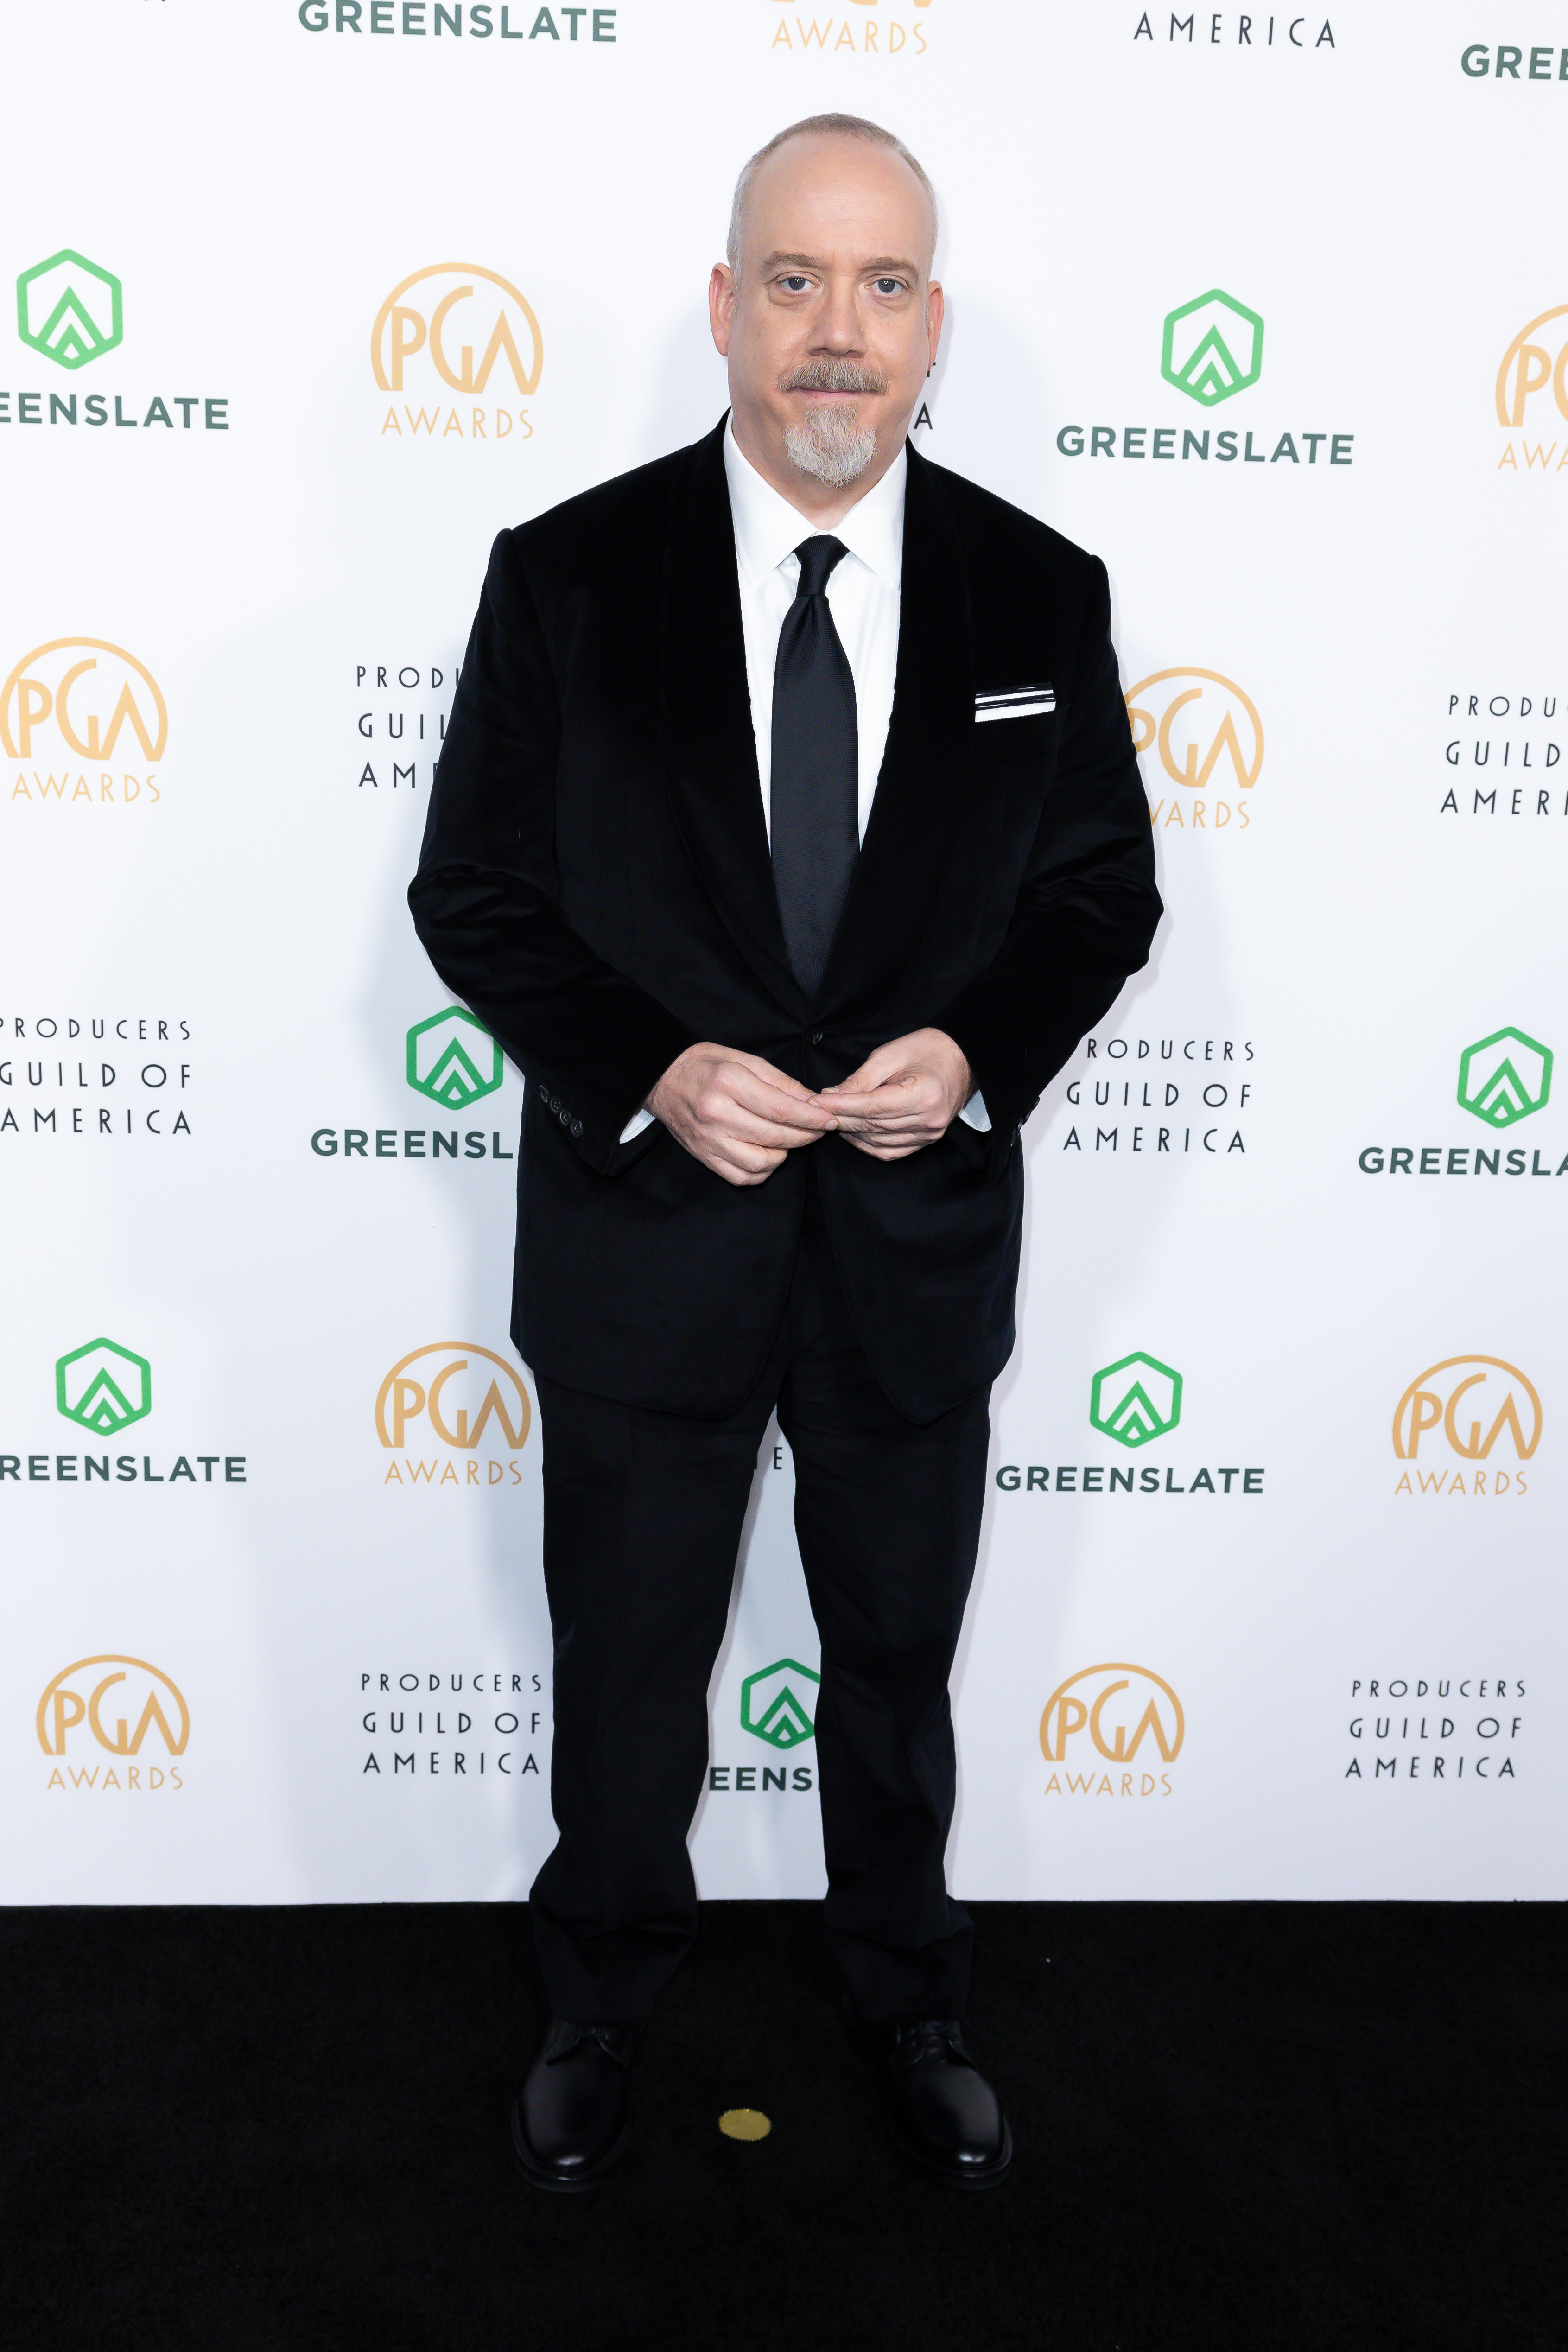 Paul in a suit standing in front of a step-and-repeat banner at the PGA Awards